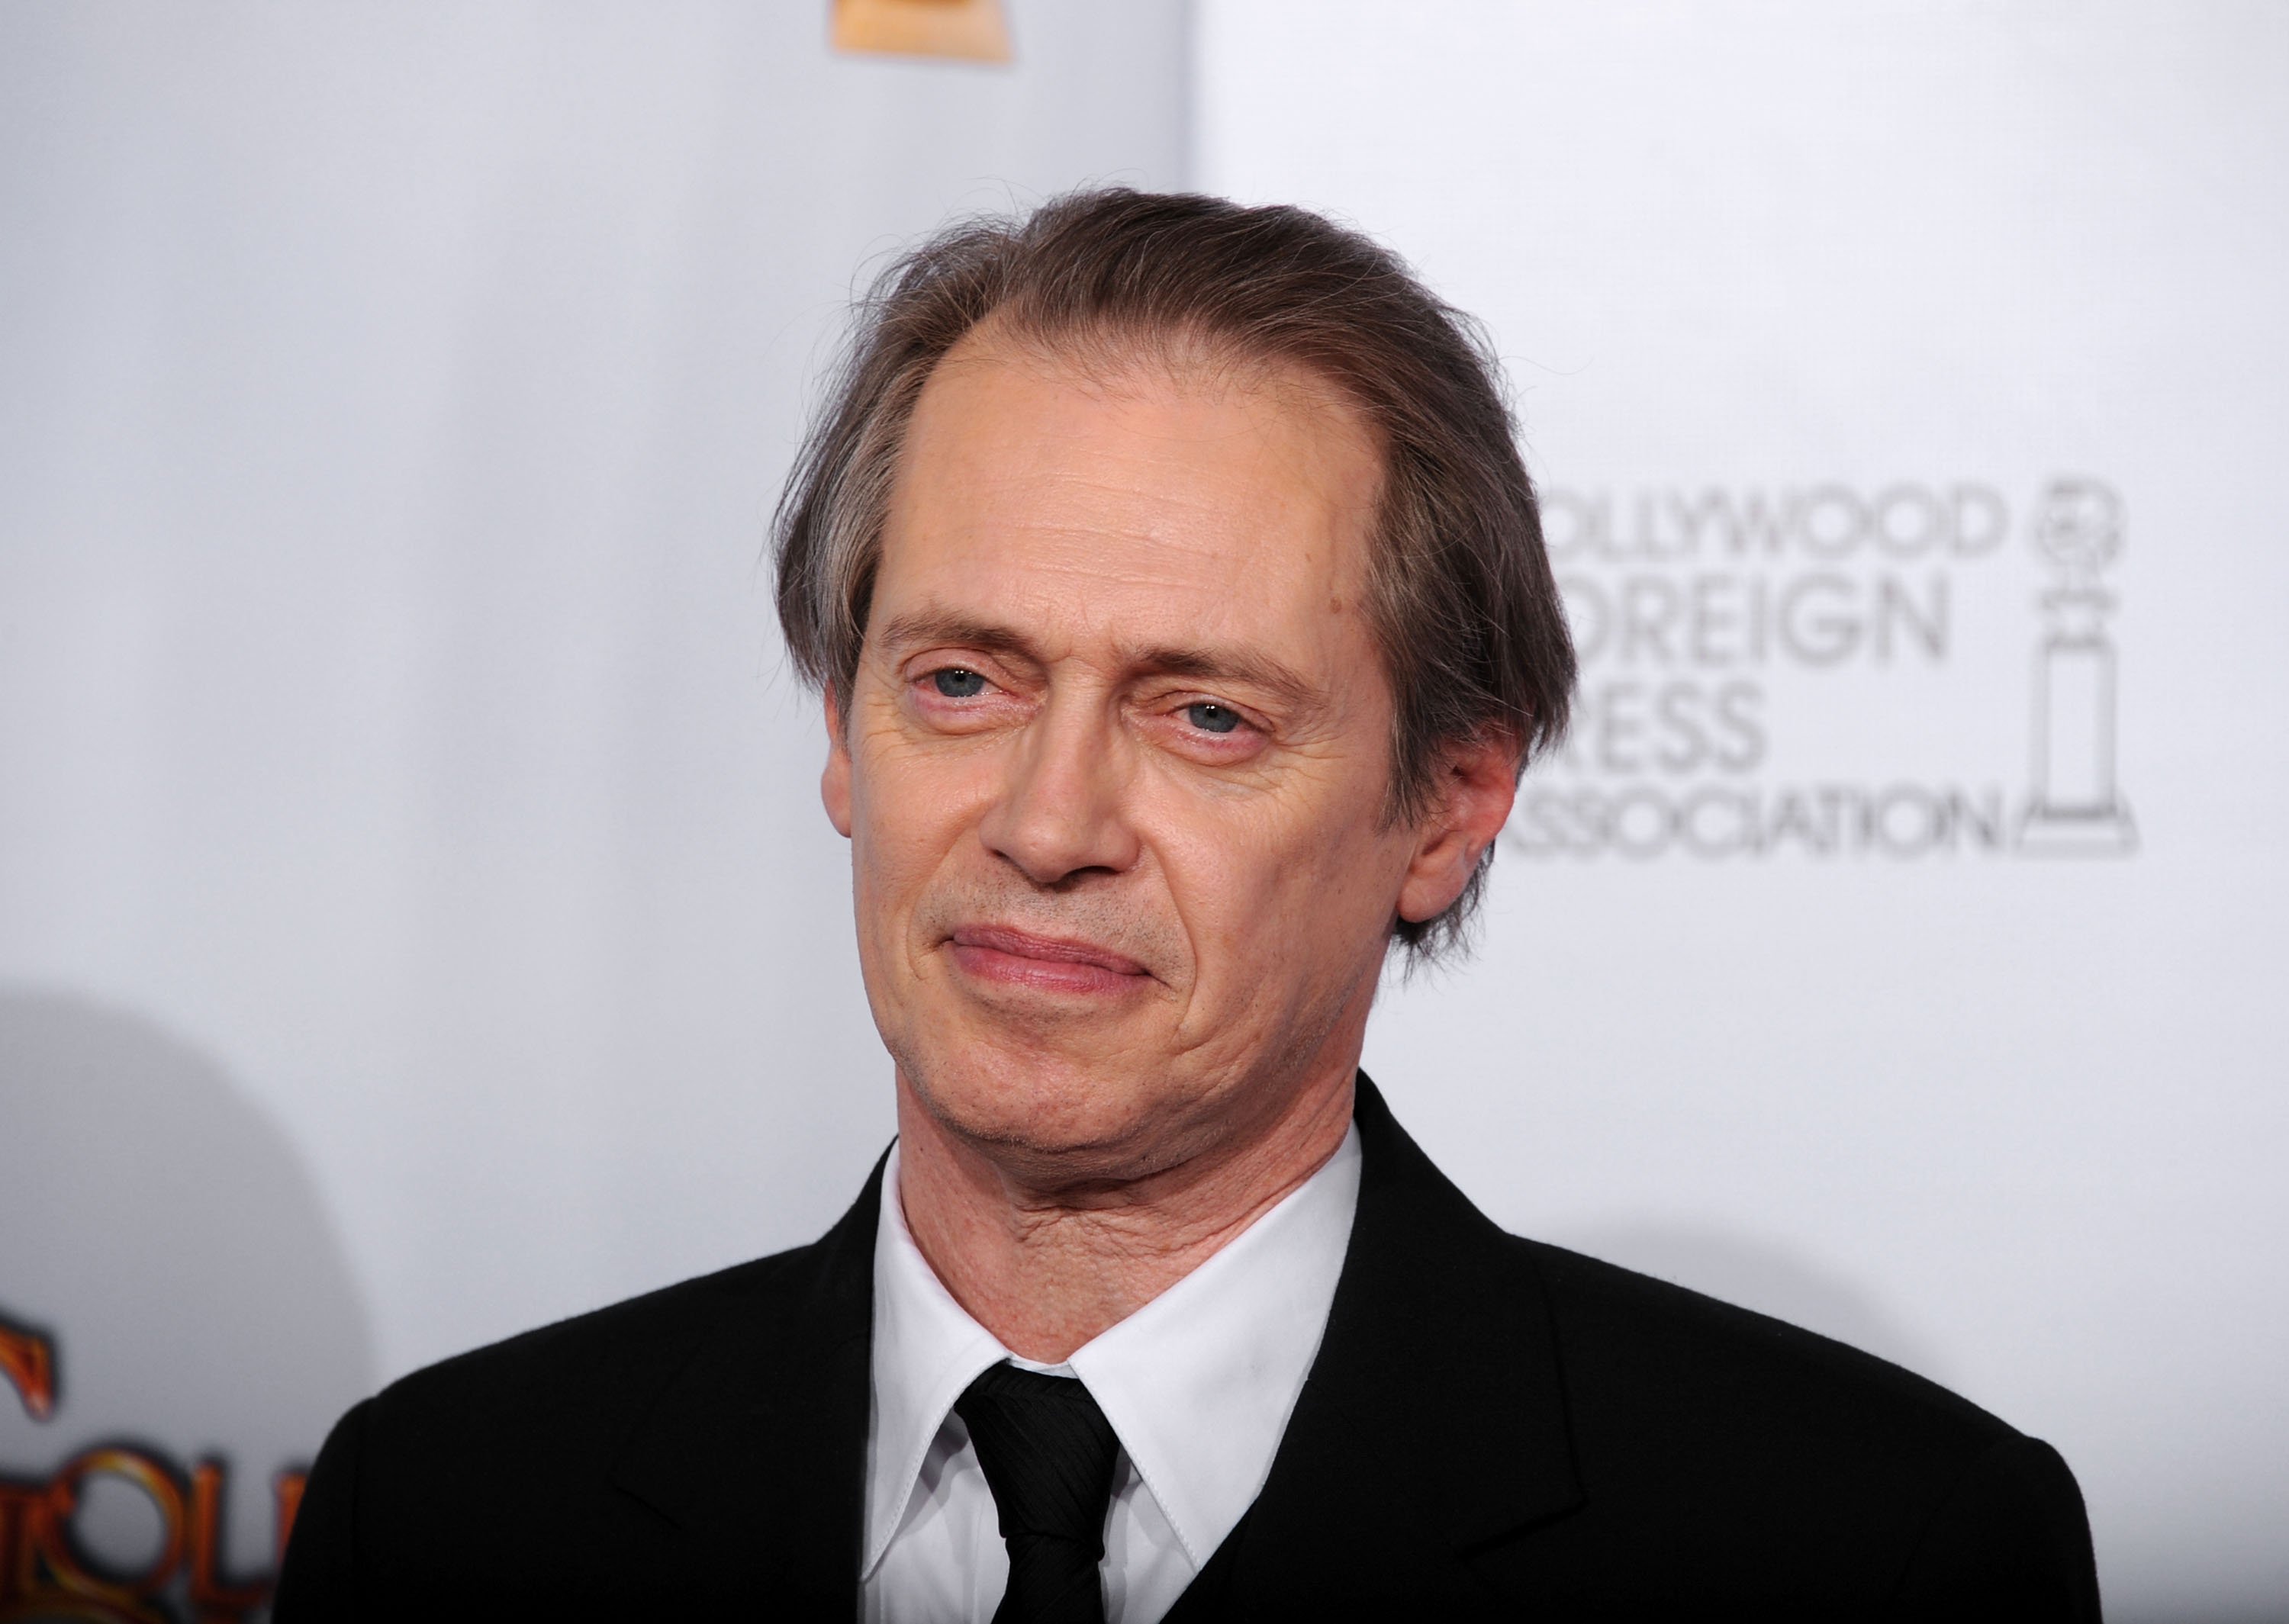 Steve Buscemi poses with his award for Best Actor in a Television Series (Drama) for "Boardwalk Empire" in the press room at the 68th Annual Golden Globe Awards